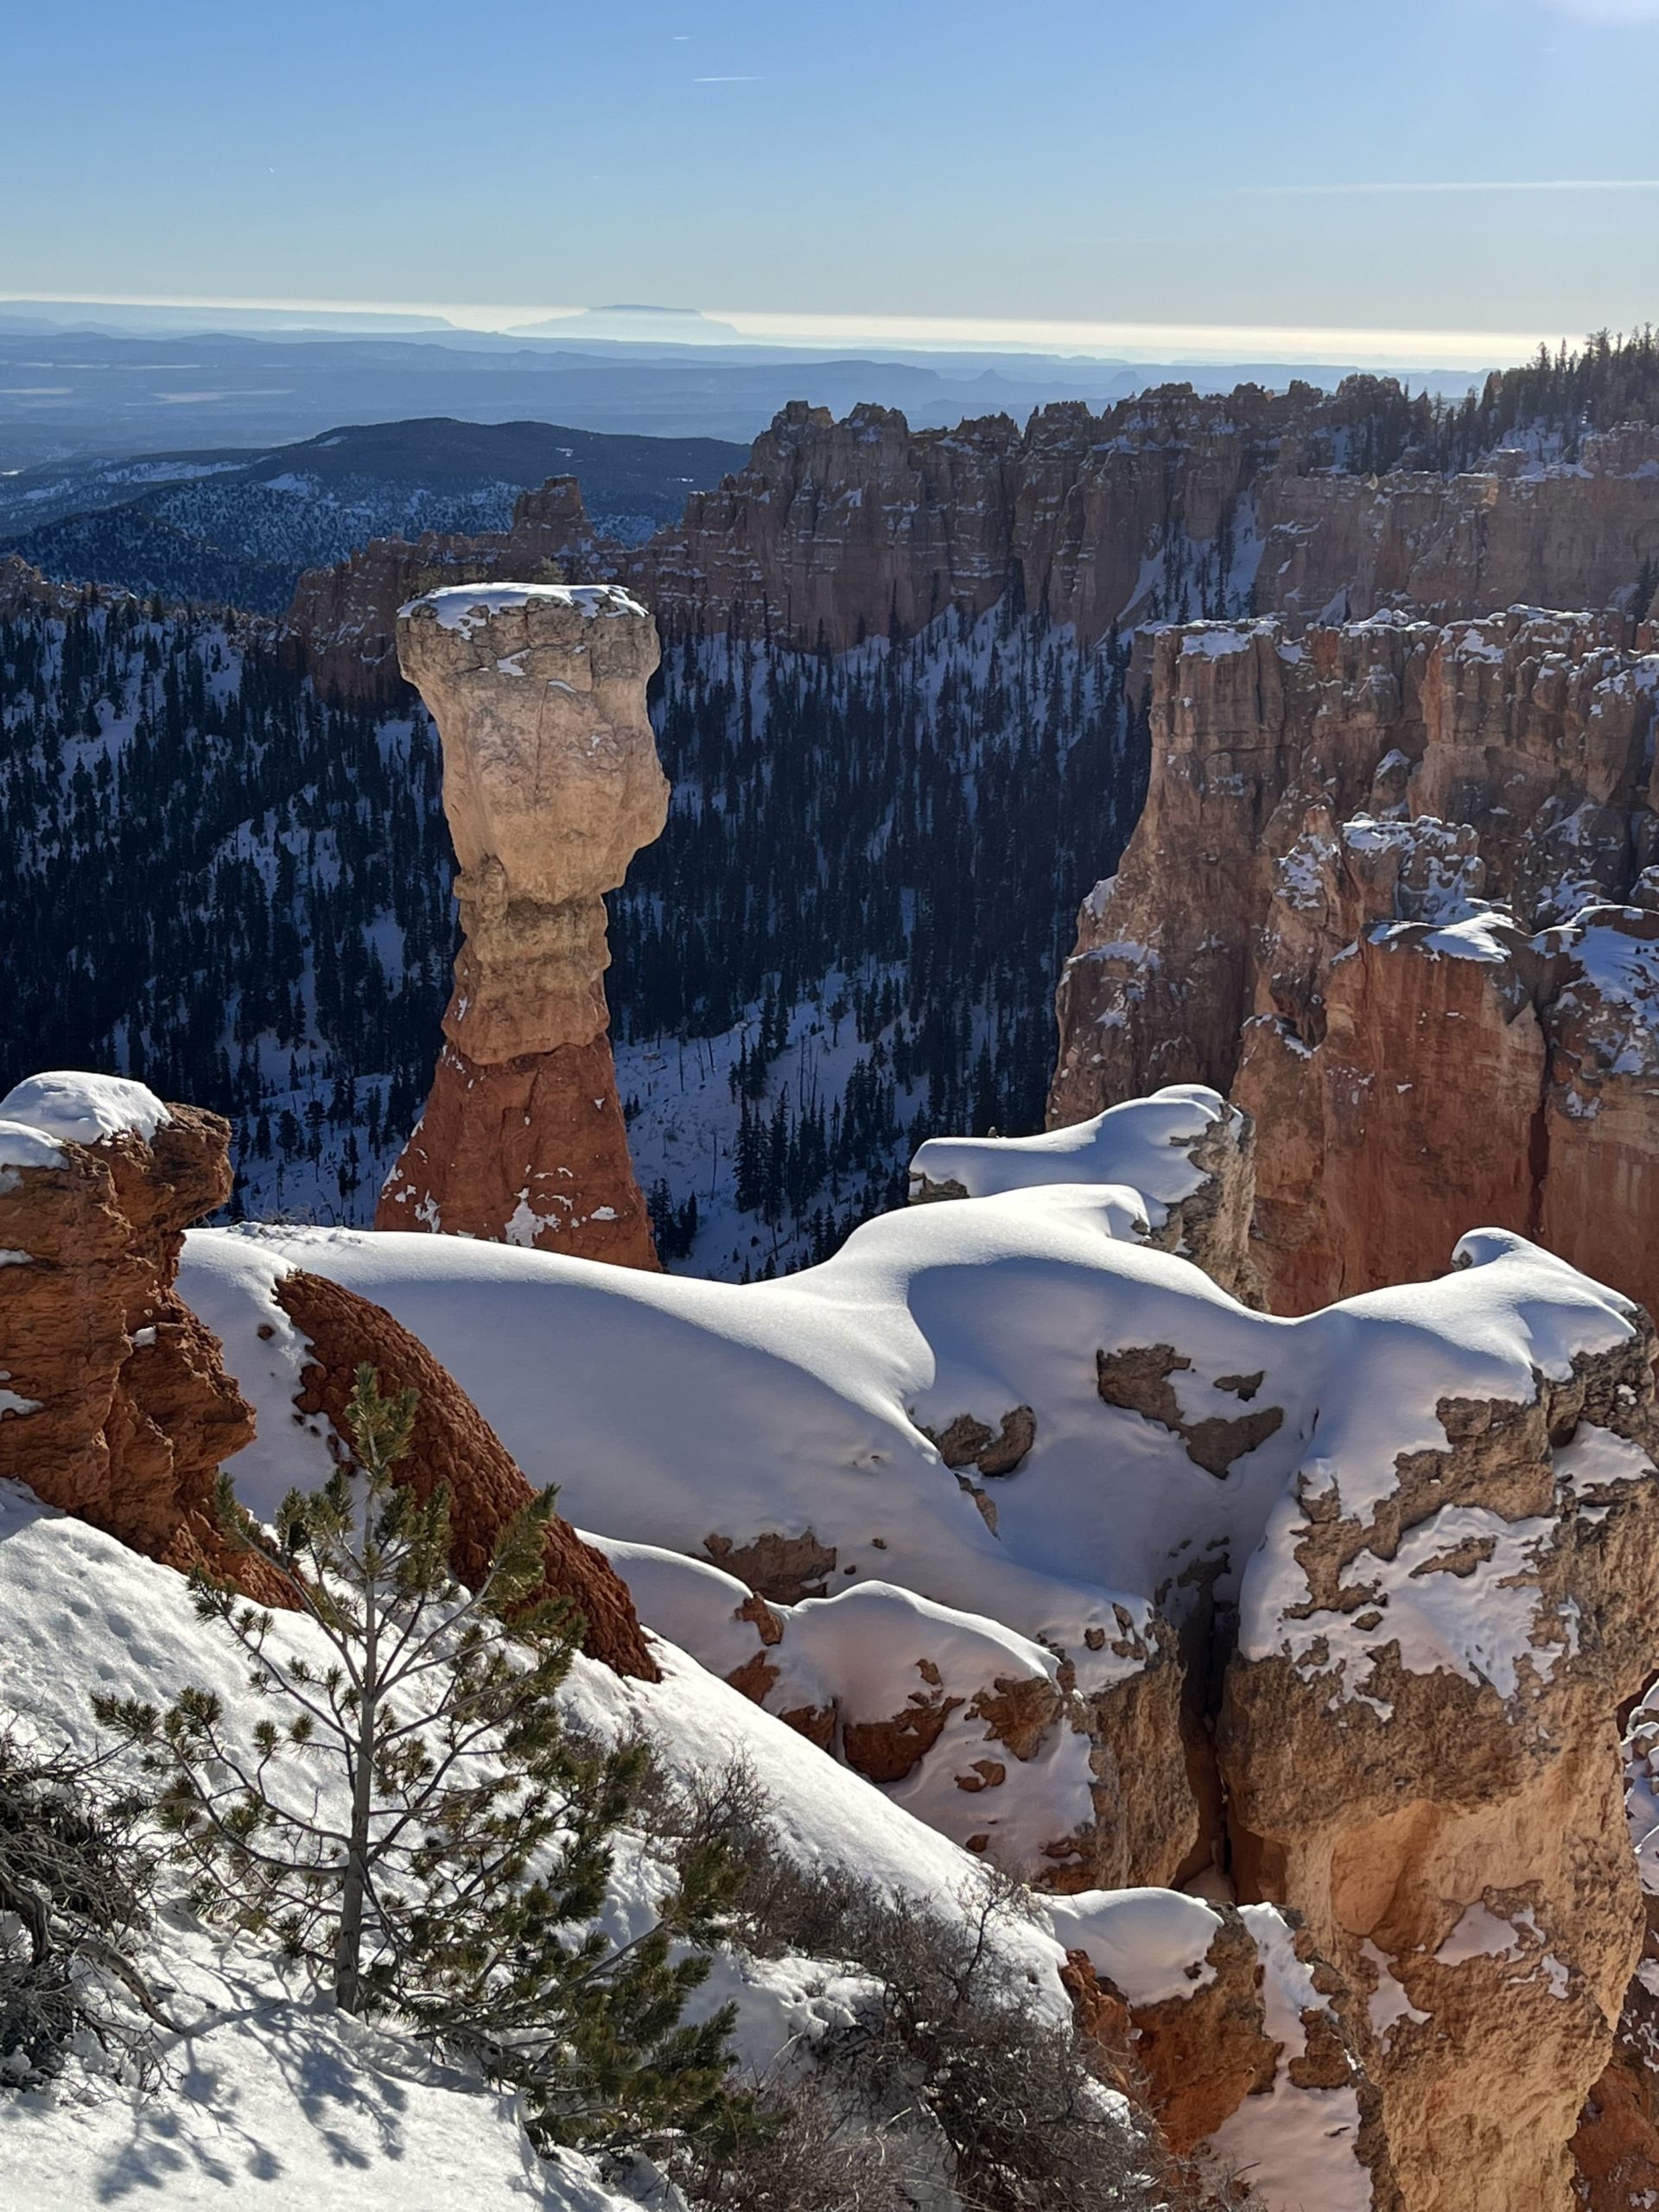 Snow-frosted Hoodoos of Bryce Canyon
Courtesy & Copyright Shannon Rhodes, Photographer